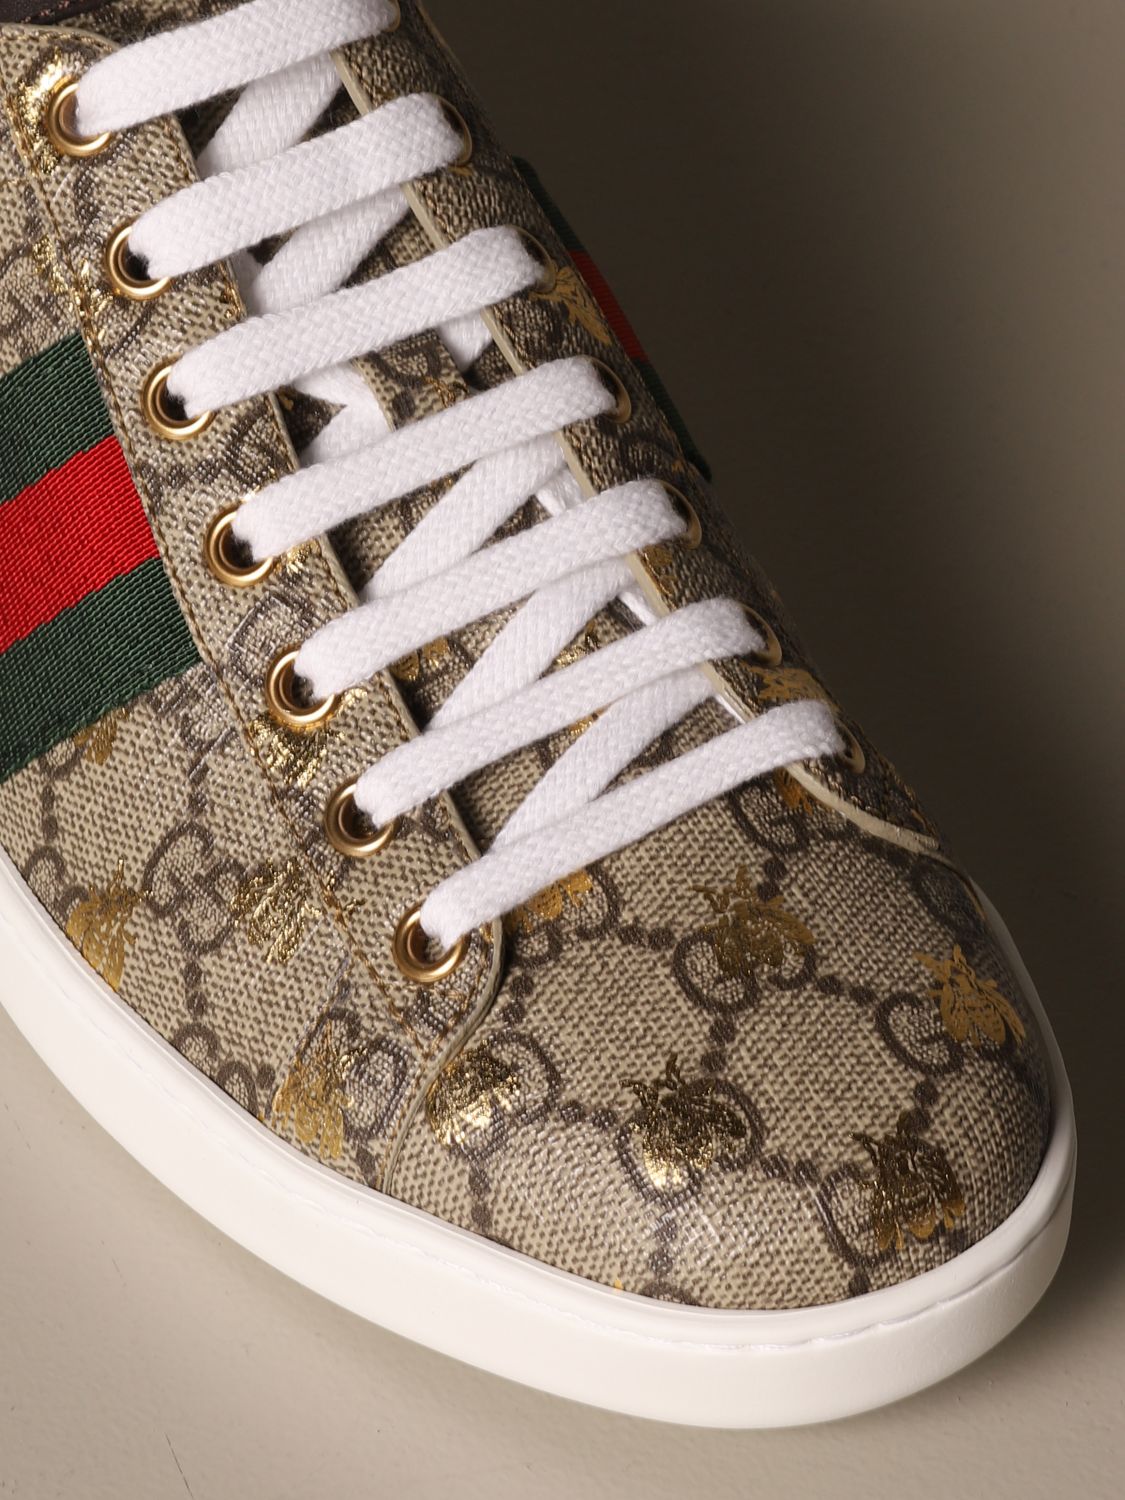 Gucci Ace sneakers with GG Supreme print and laminated bees | Sneakers ...